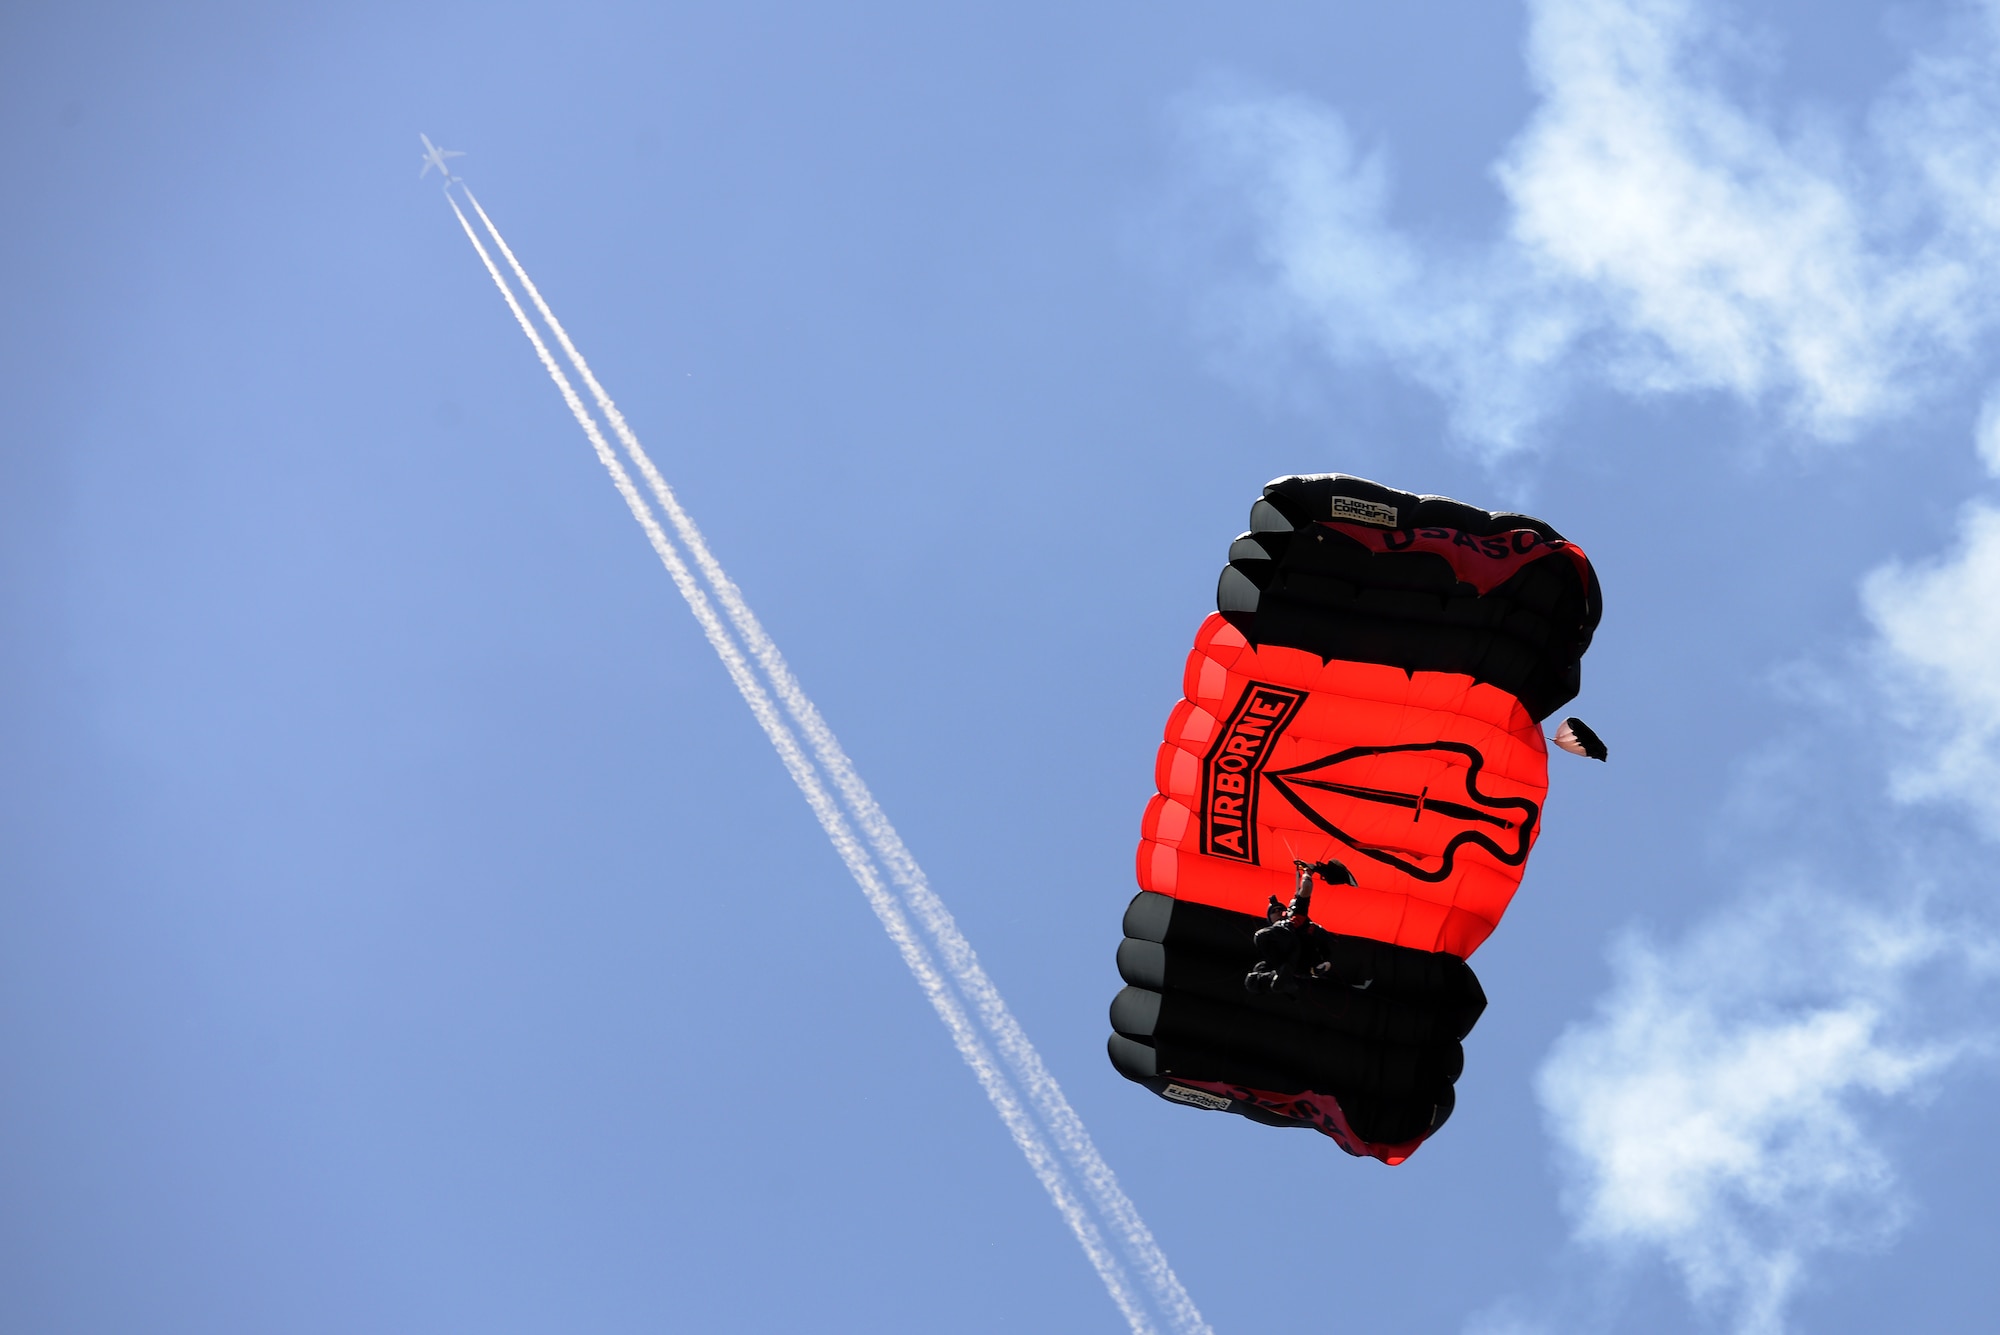 Members of the Black Daggers, the official U.S. Army Special Operations Command Parachute Demonstration Team, perform aerial stunts during Scott Air Force Base 2017 Air Show and Open House June 9, 2017, which celebrates the base’s 100th anniversary.  Black Daggers are highly trained Soldiers who insert themselves behind enemy lines to disrupt the movement of enemy troops and supplies to the front lines.  They frequently use parachutes to infiltrate without being detected. (U.S. Air Force photo by Tech. Sgt. Jonathan Fowler)